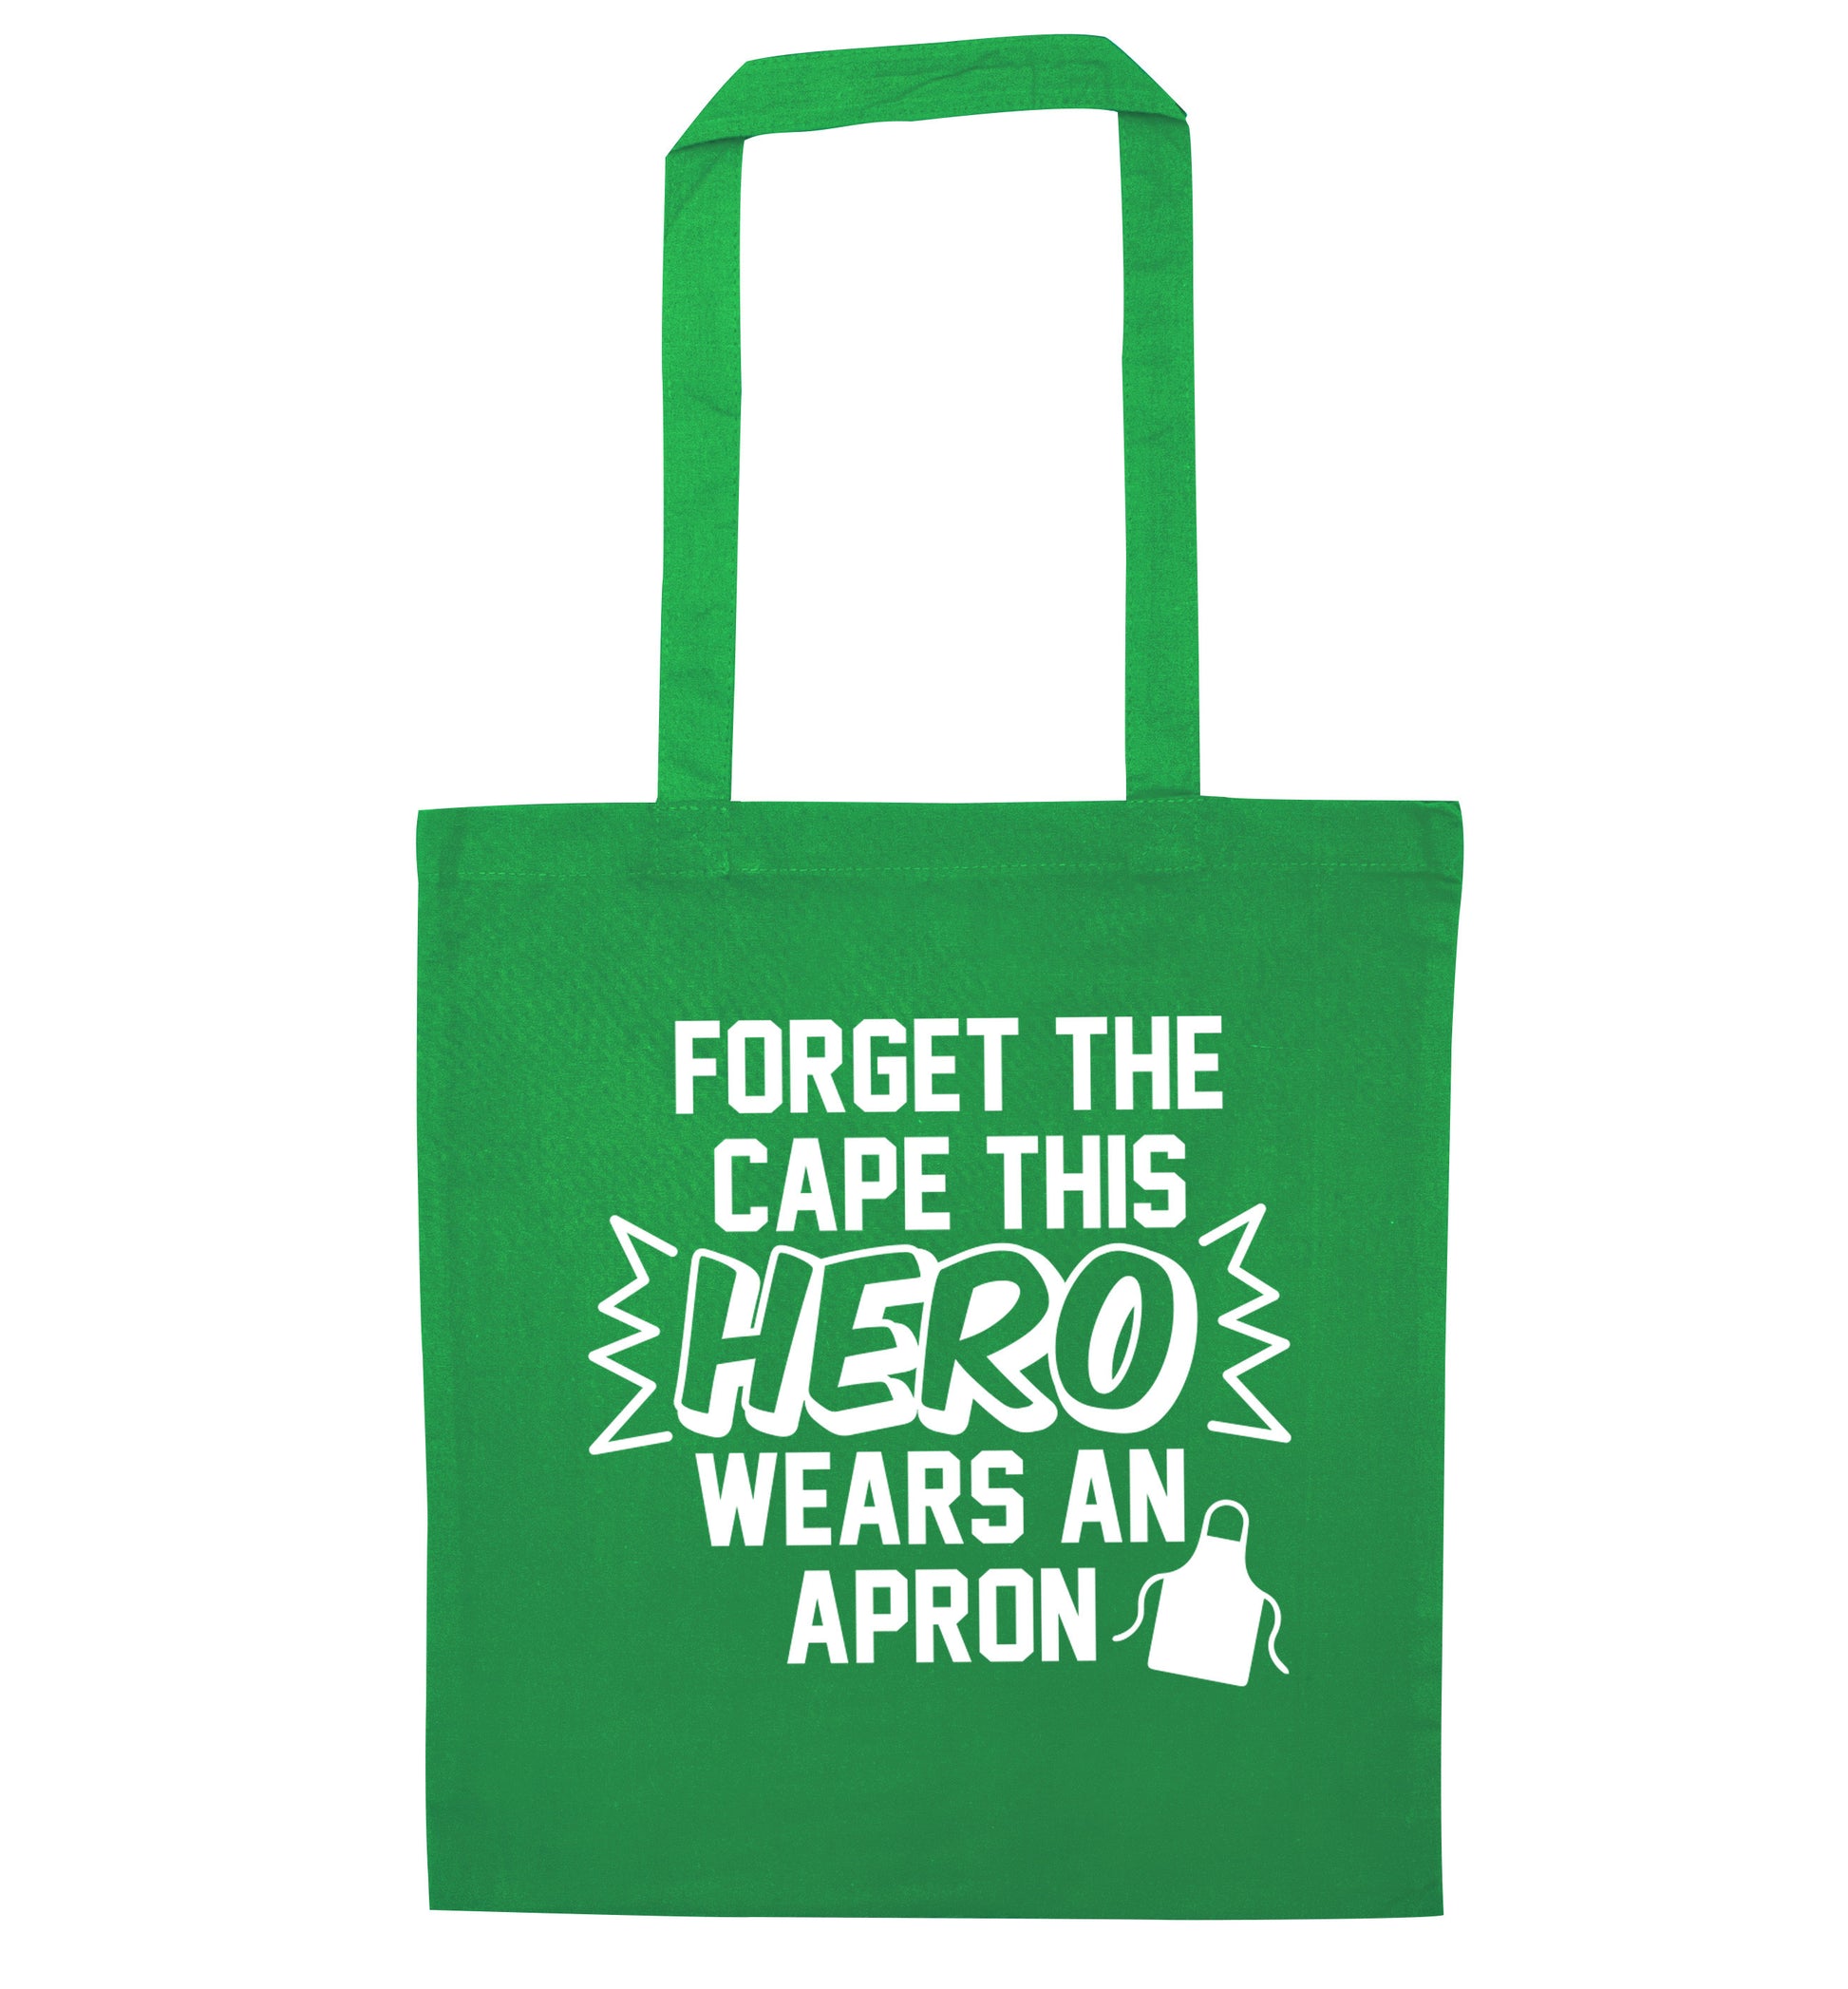 Forget the cape this hero wears an apron green tote bag